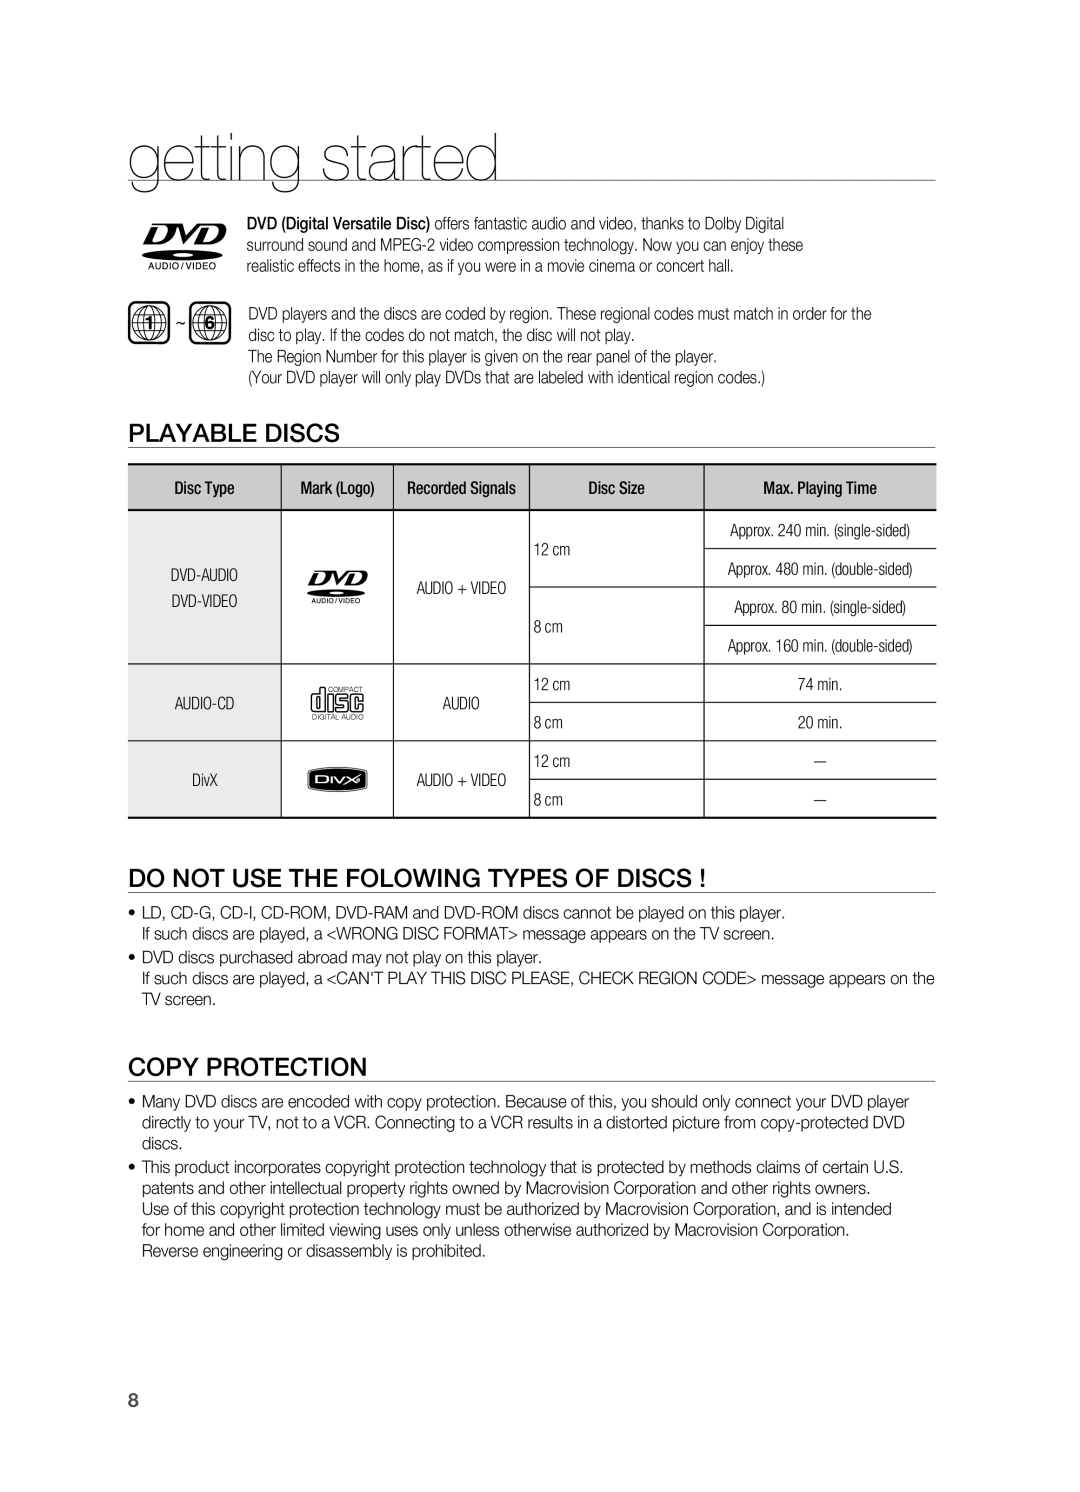 Samsung HT-X710 user manual Playable Discs, Do not use the folowing types of discS, Copy Protection, getting started 